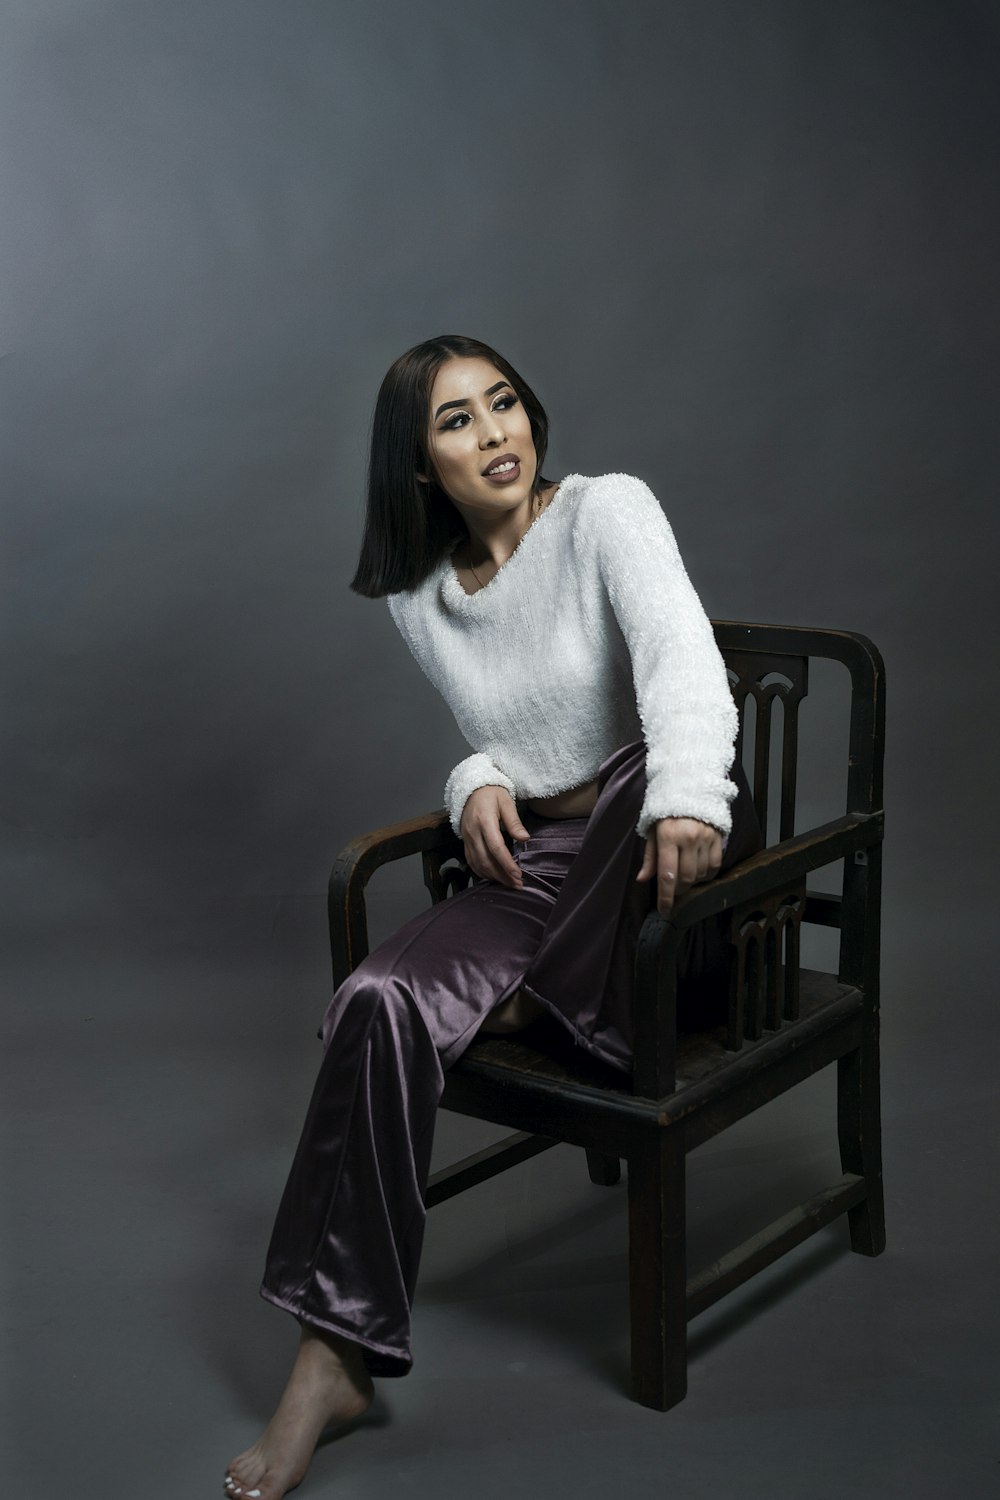 a woman is sitting on a chair posing for a picture